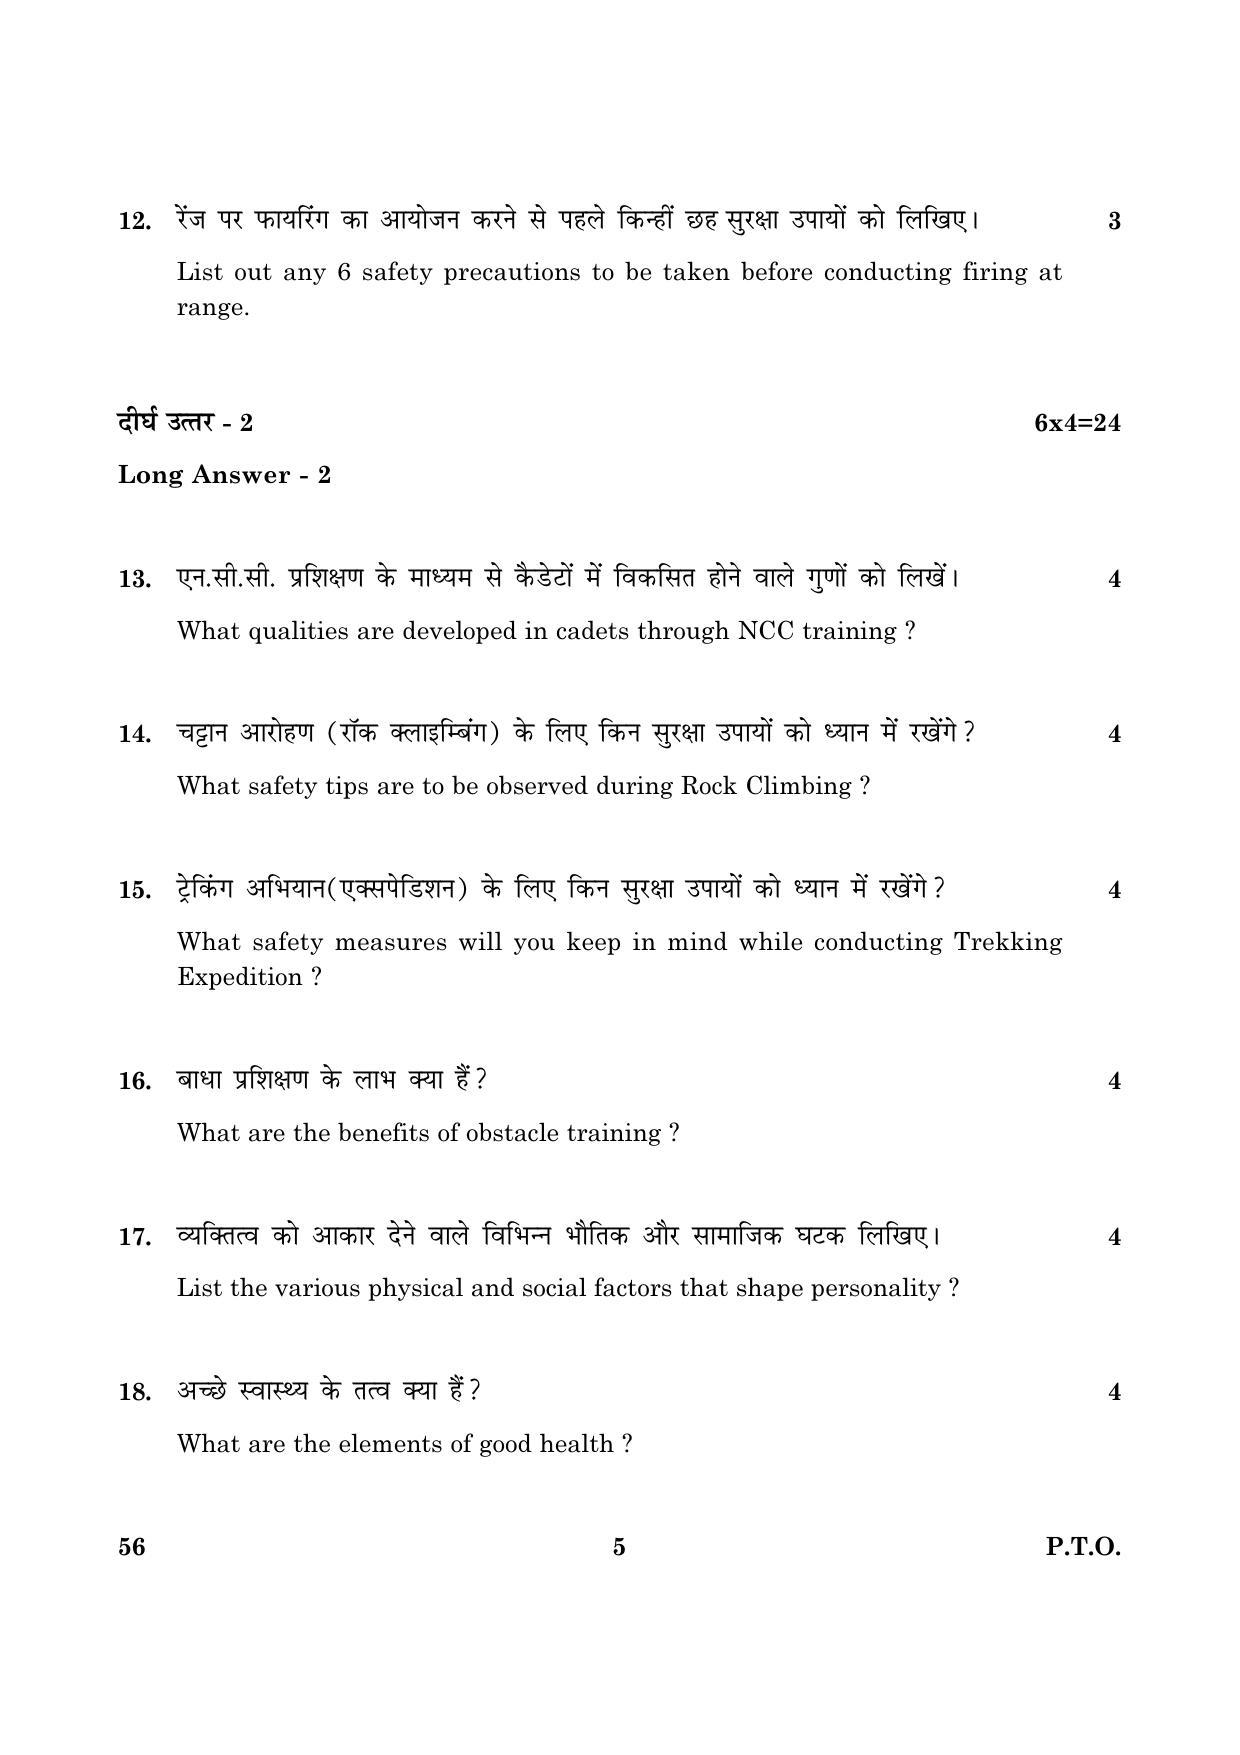 CBSE Class 10 056 National Cadet Corps 2016 Question Paper - Page 5